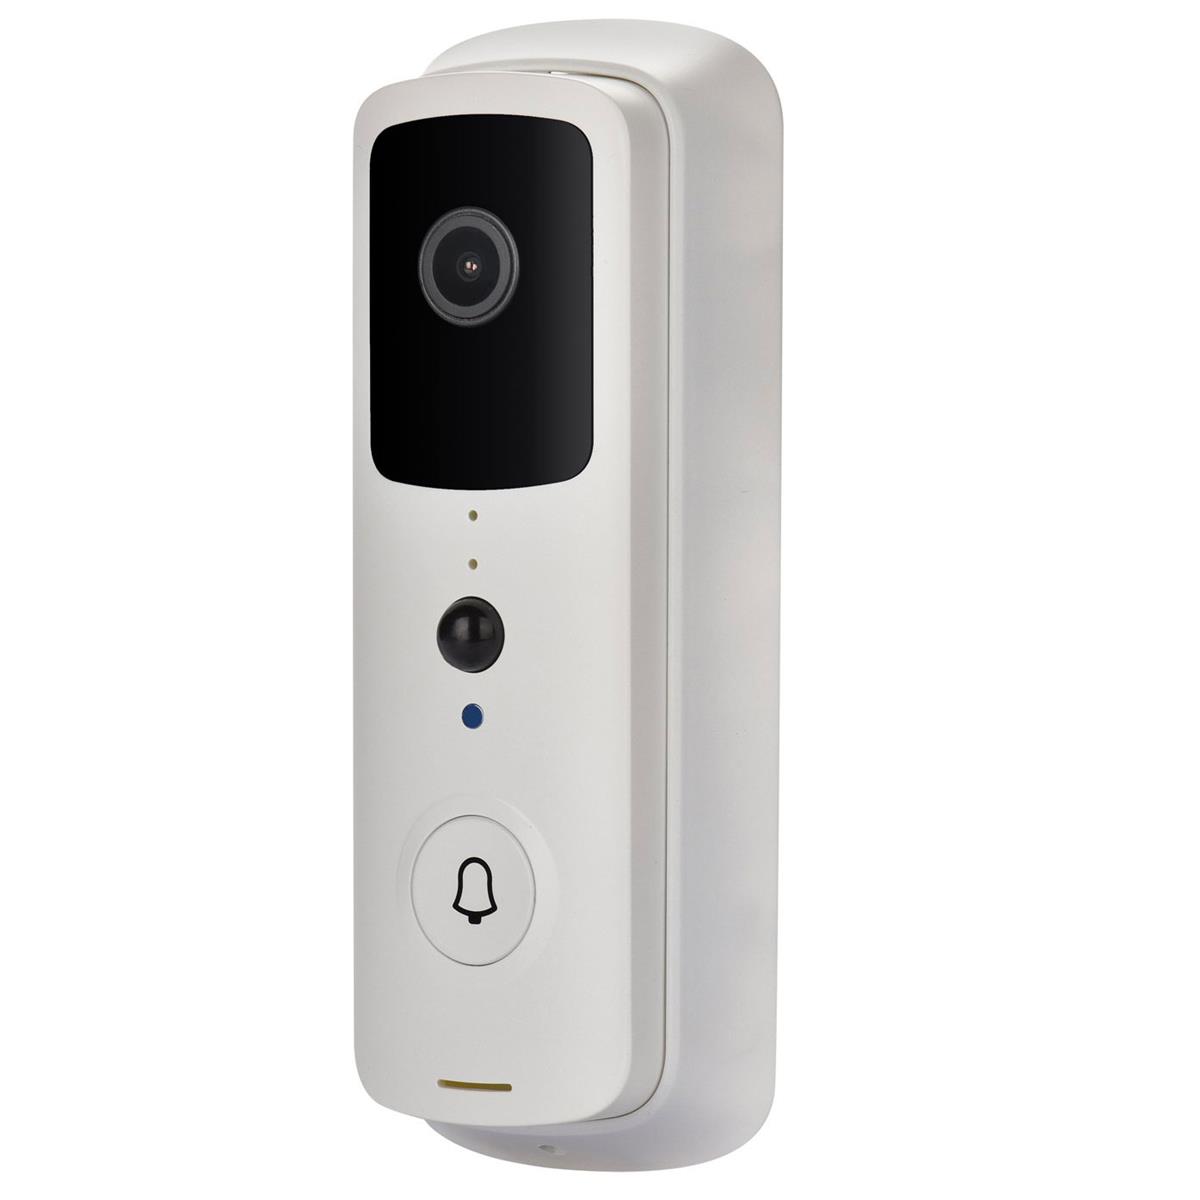 Image of KJB Security Products SG Home Battery Doorbell Camera